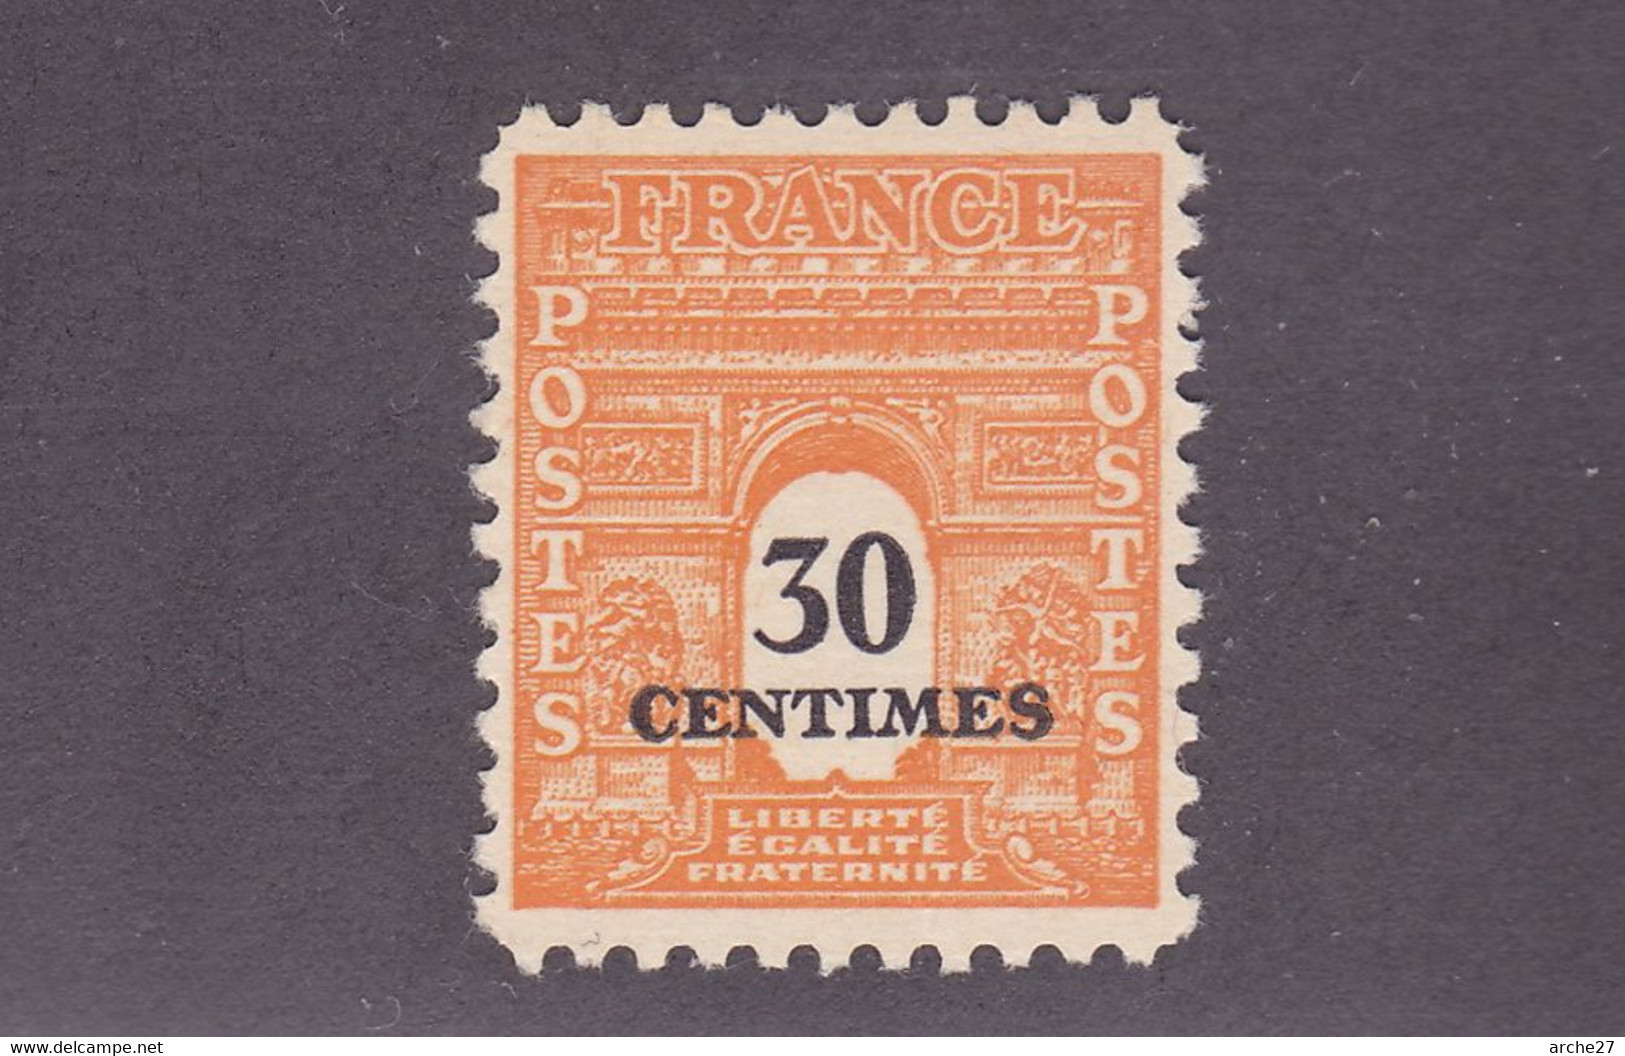 TIMBRE FRANCE N° 702 NEUF ** - Neufs